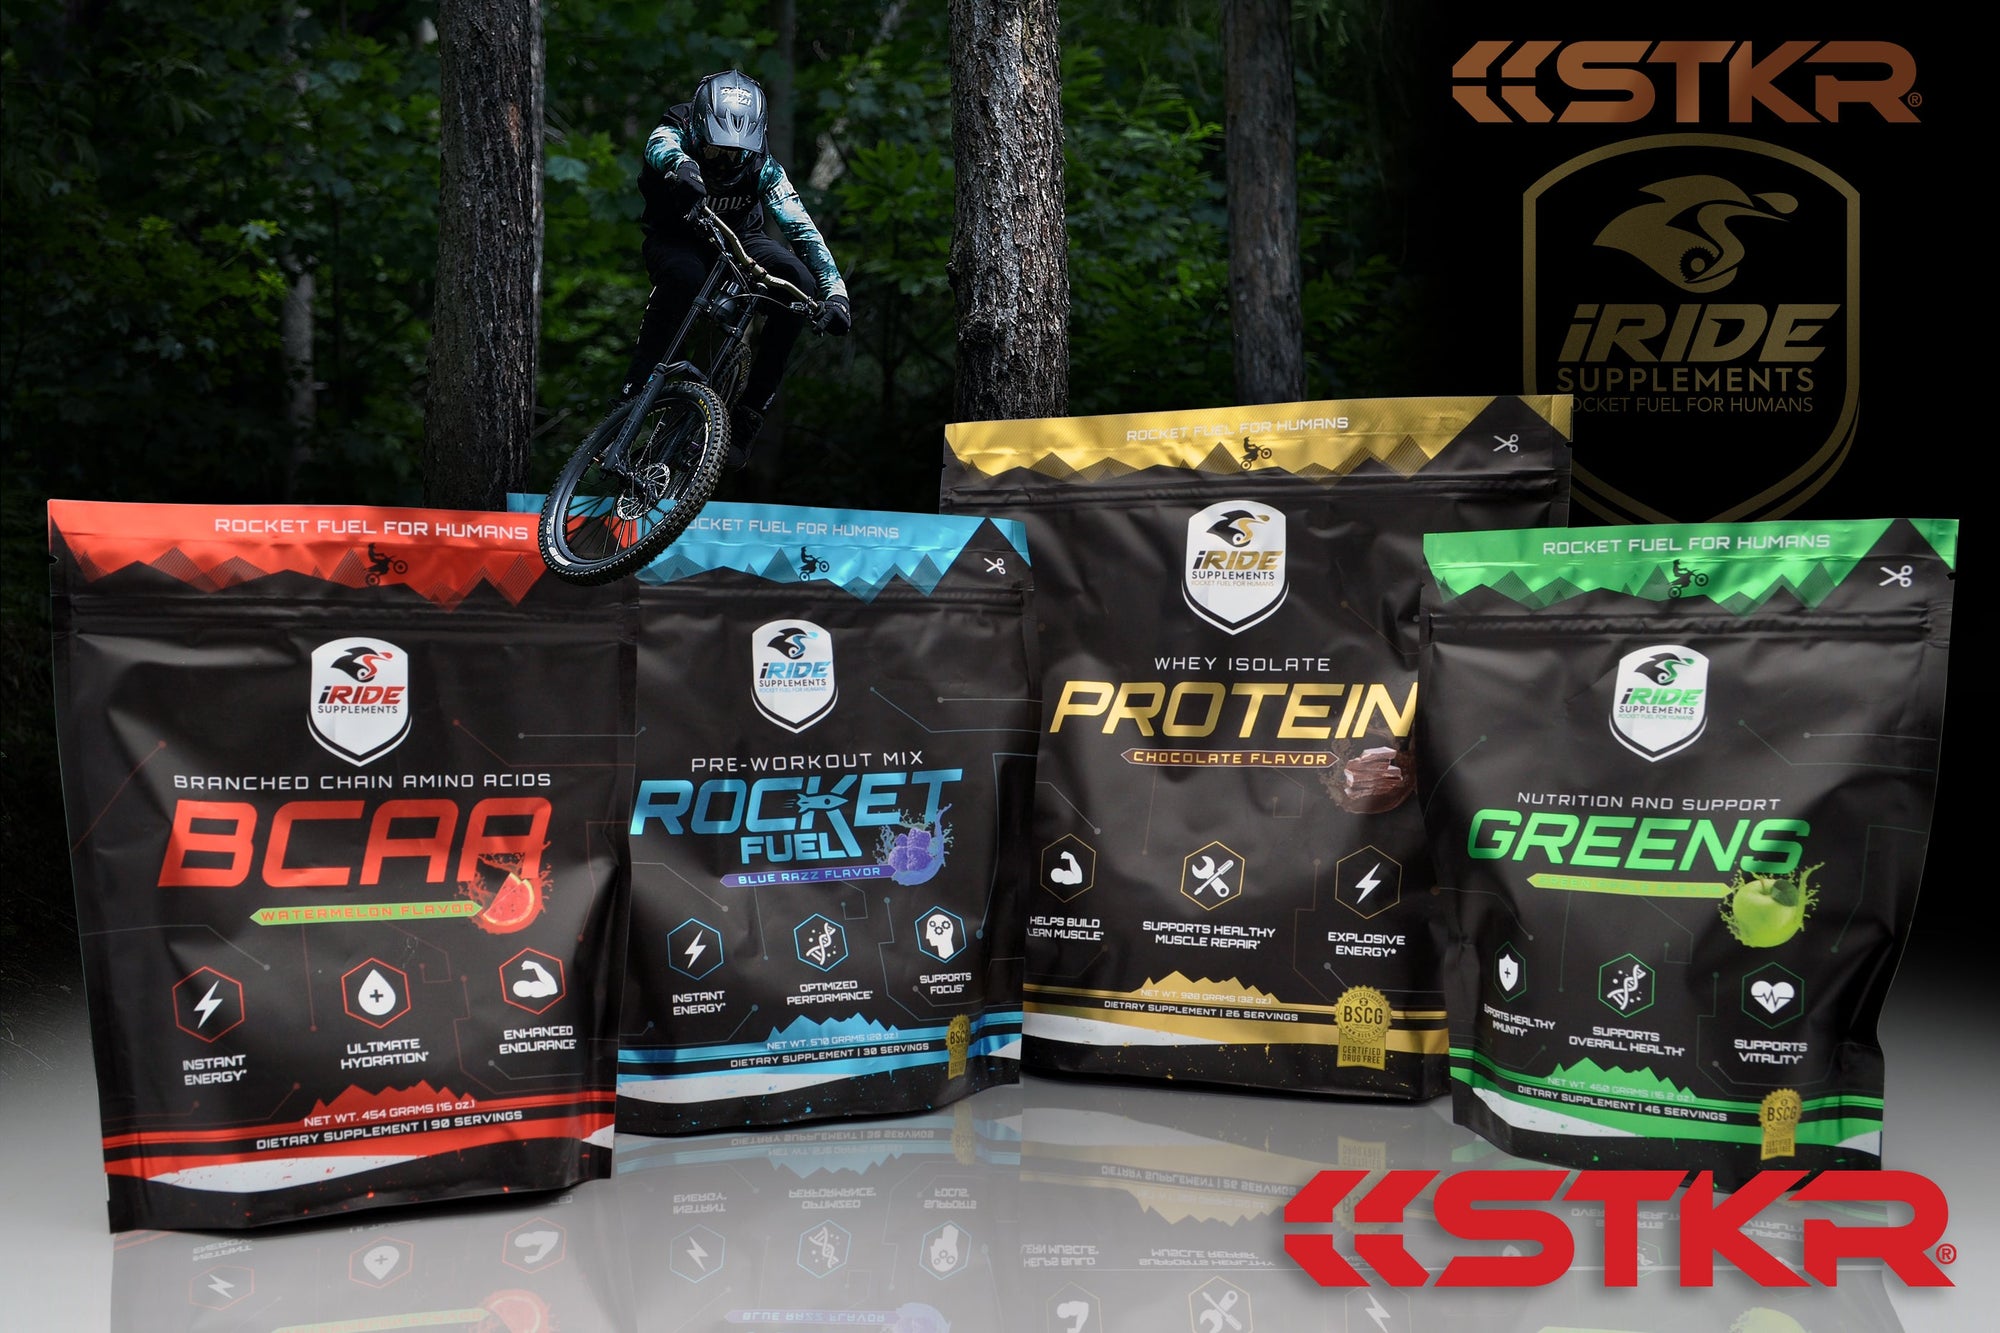 iRide Supplements. 4 bags of drink mixes lined up with a mountain biker jumping over them.